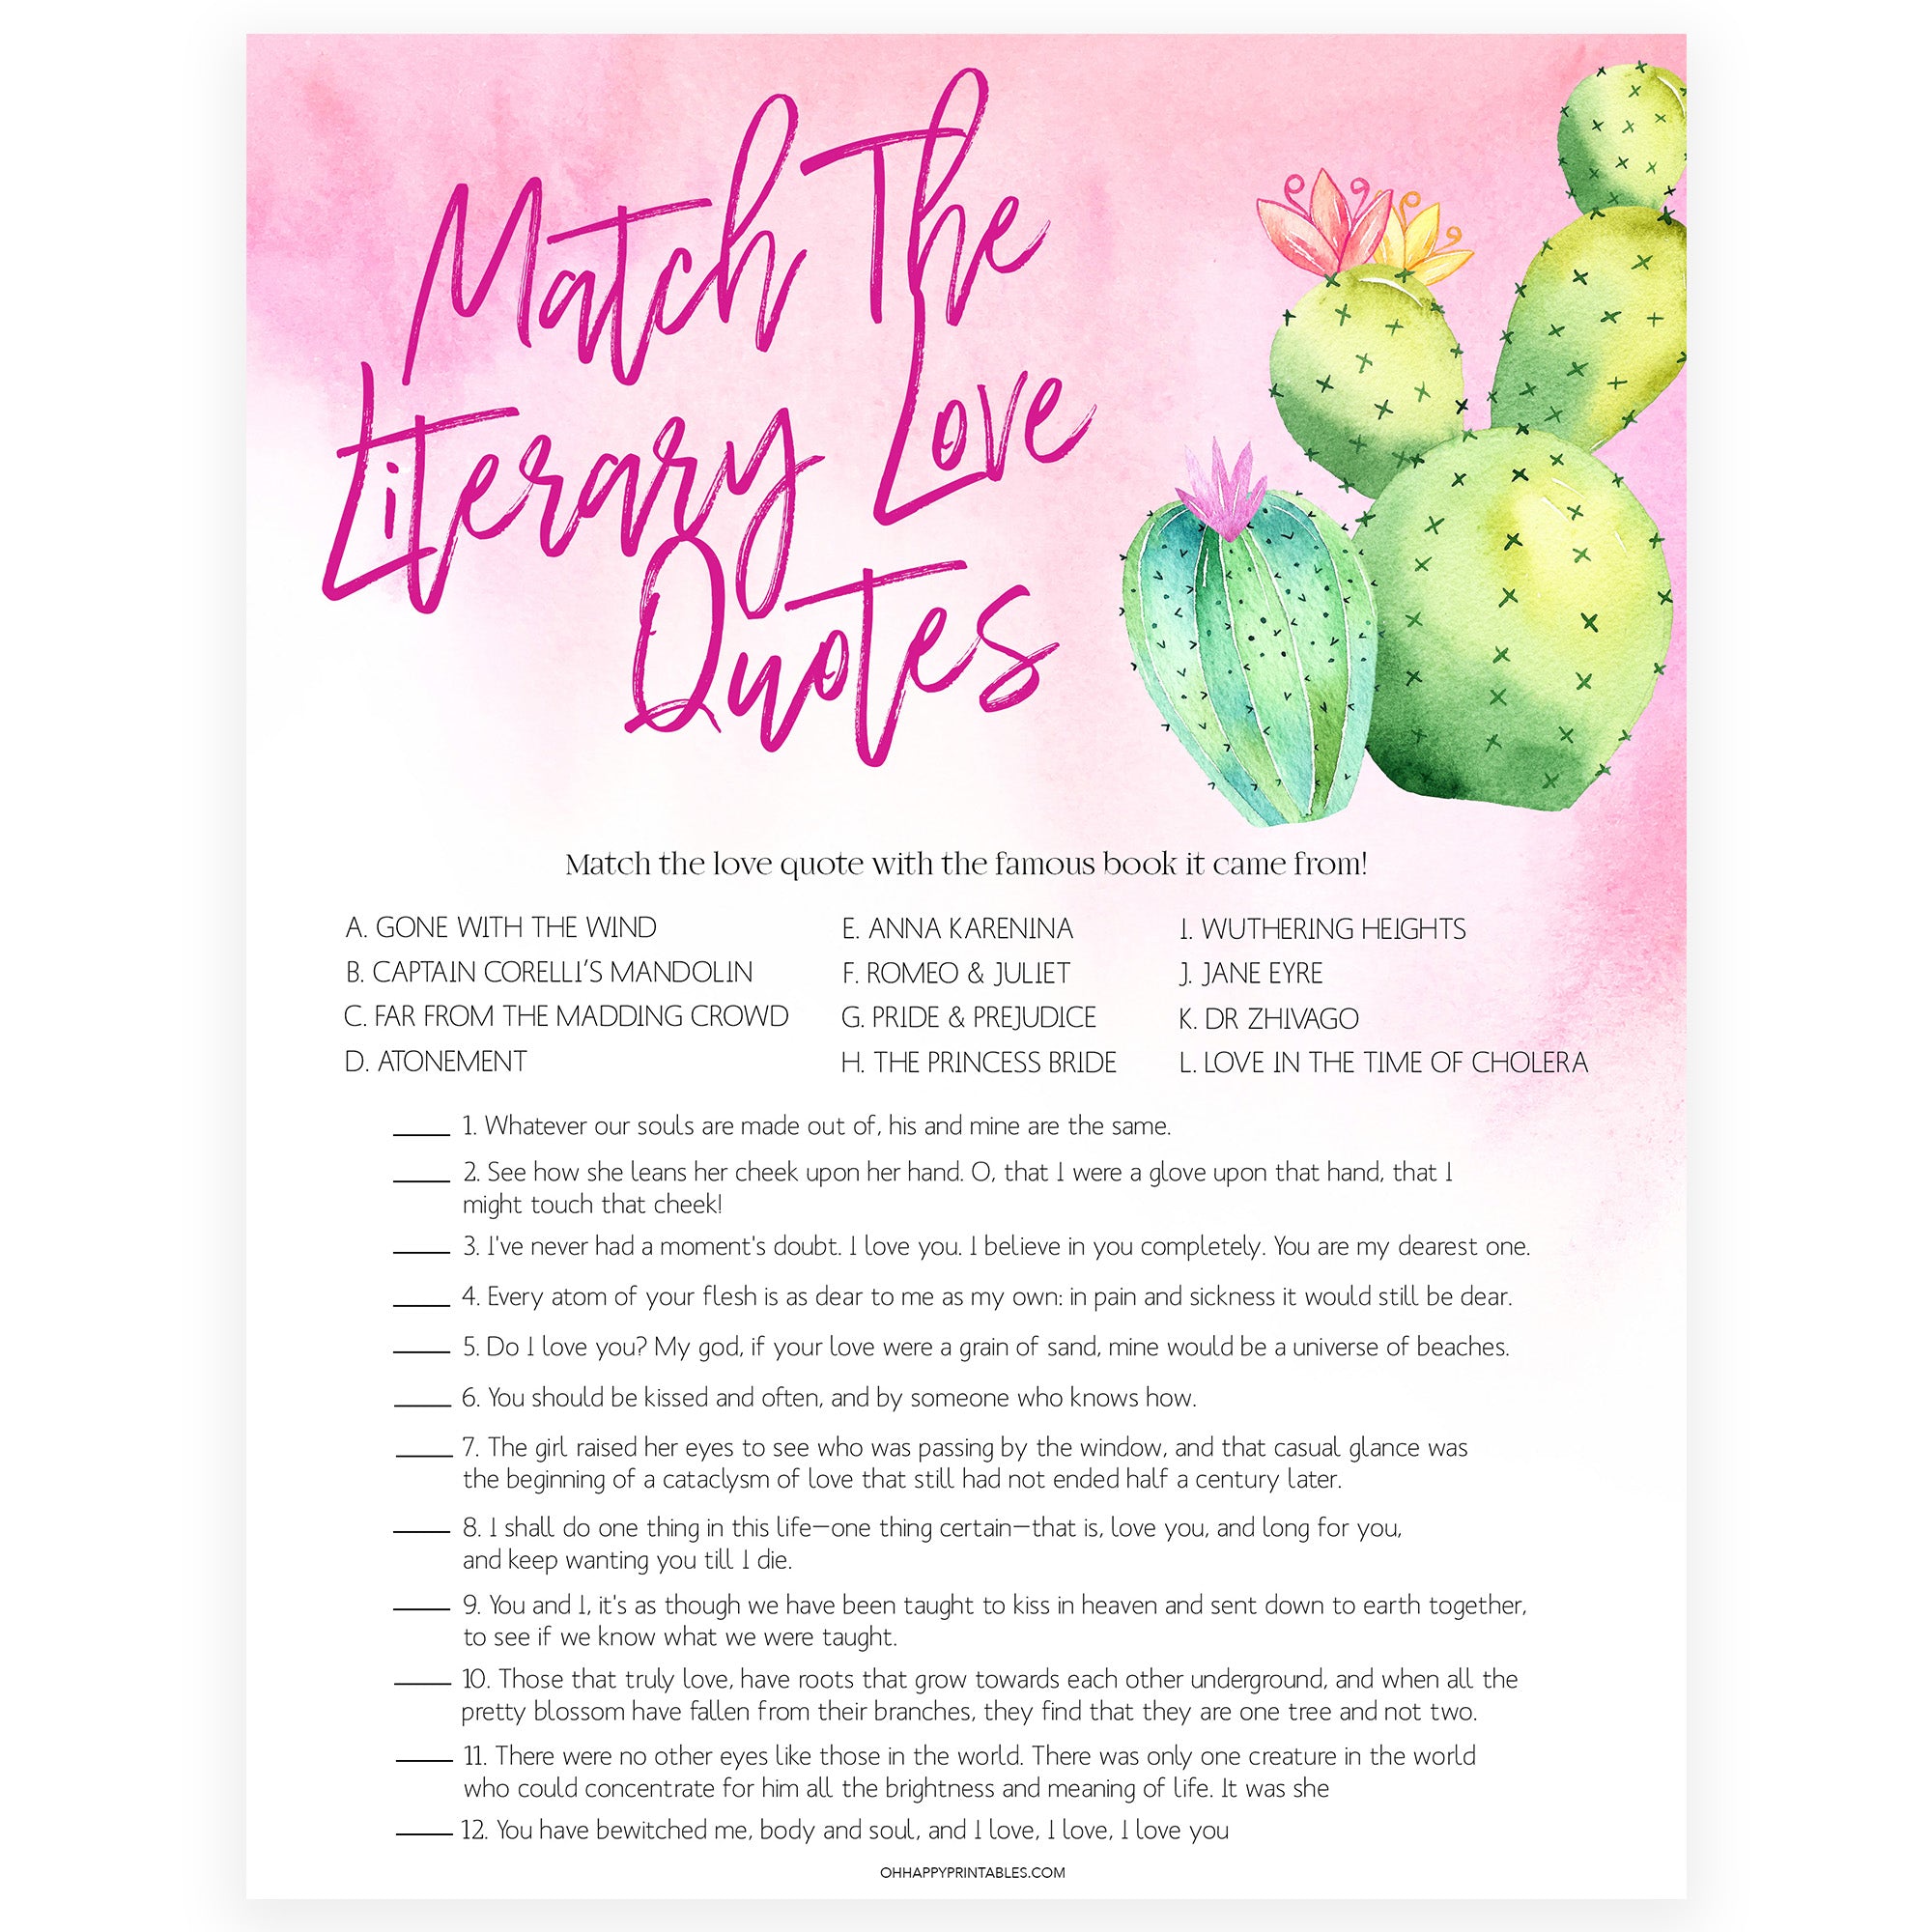 Match the Literary Love Quotes - Fiesta